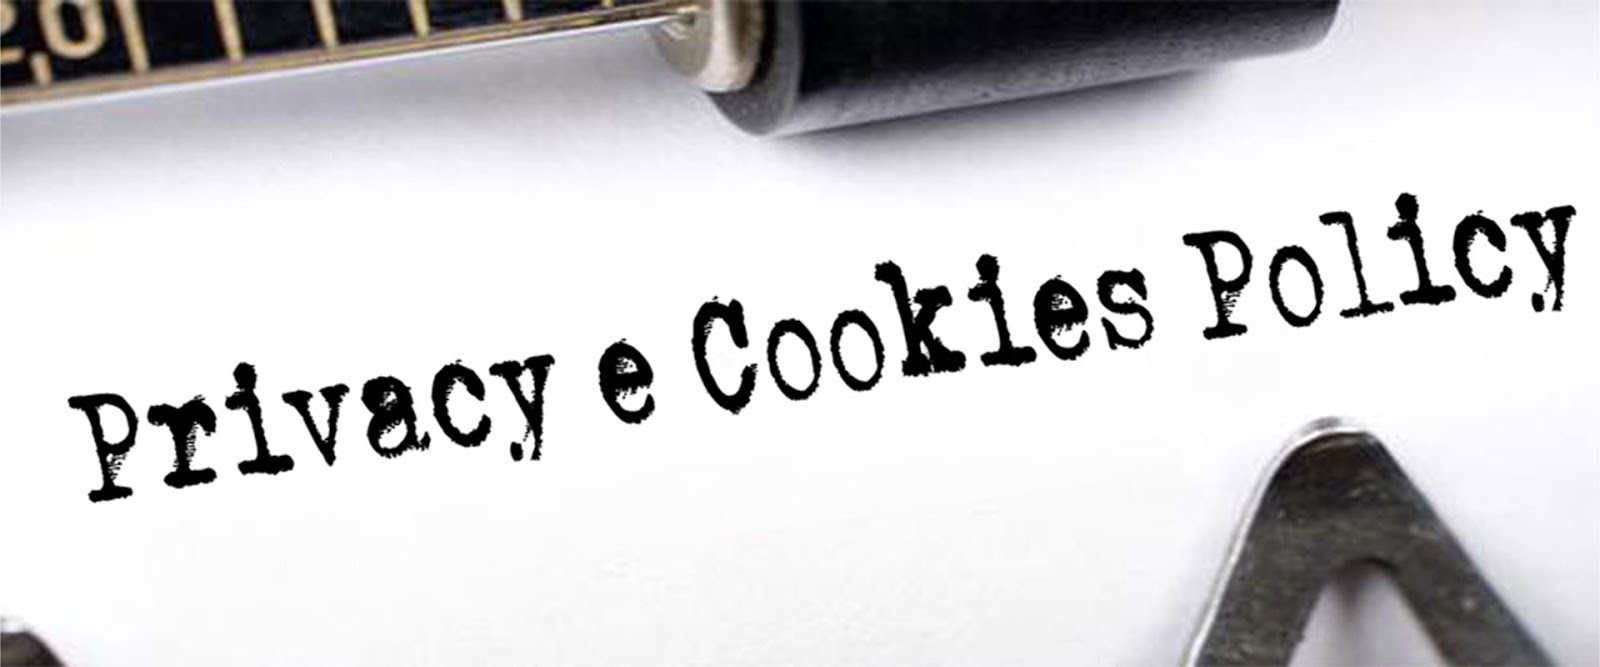 Privacy cookies and policy